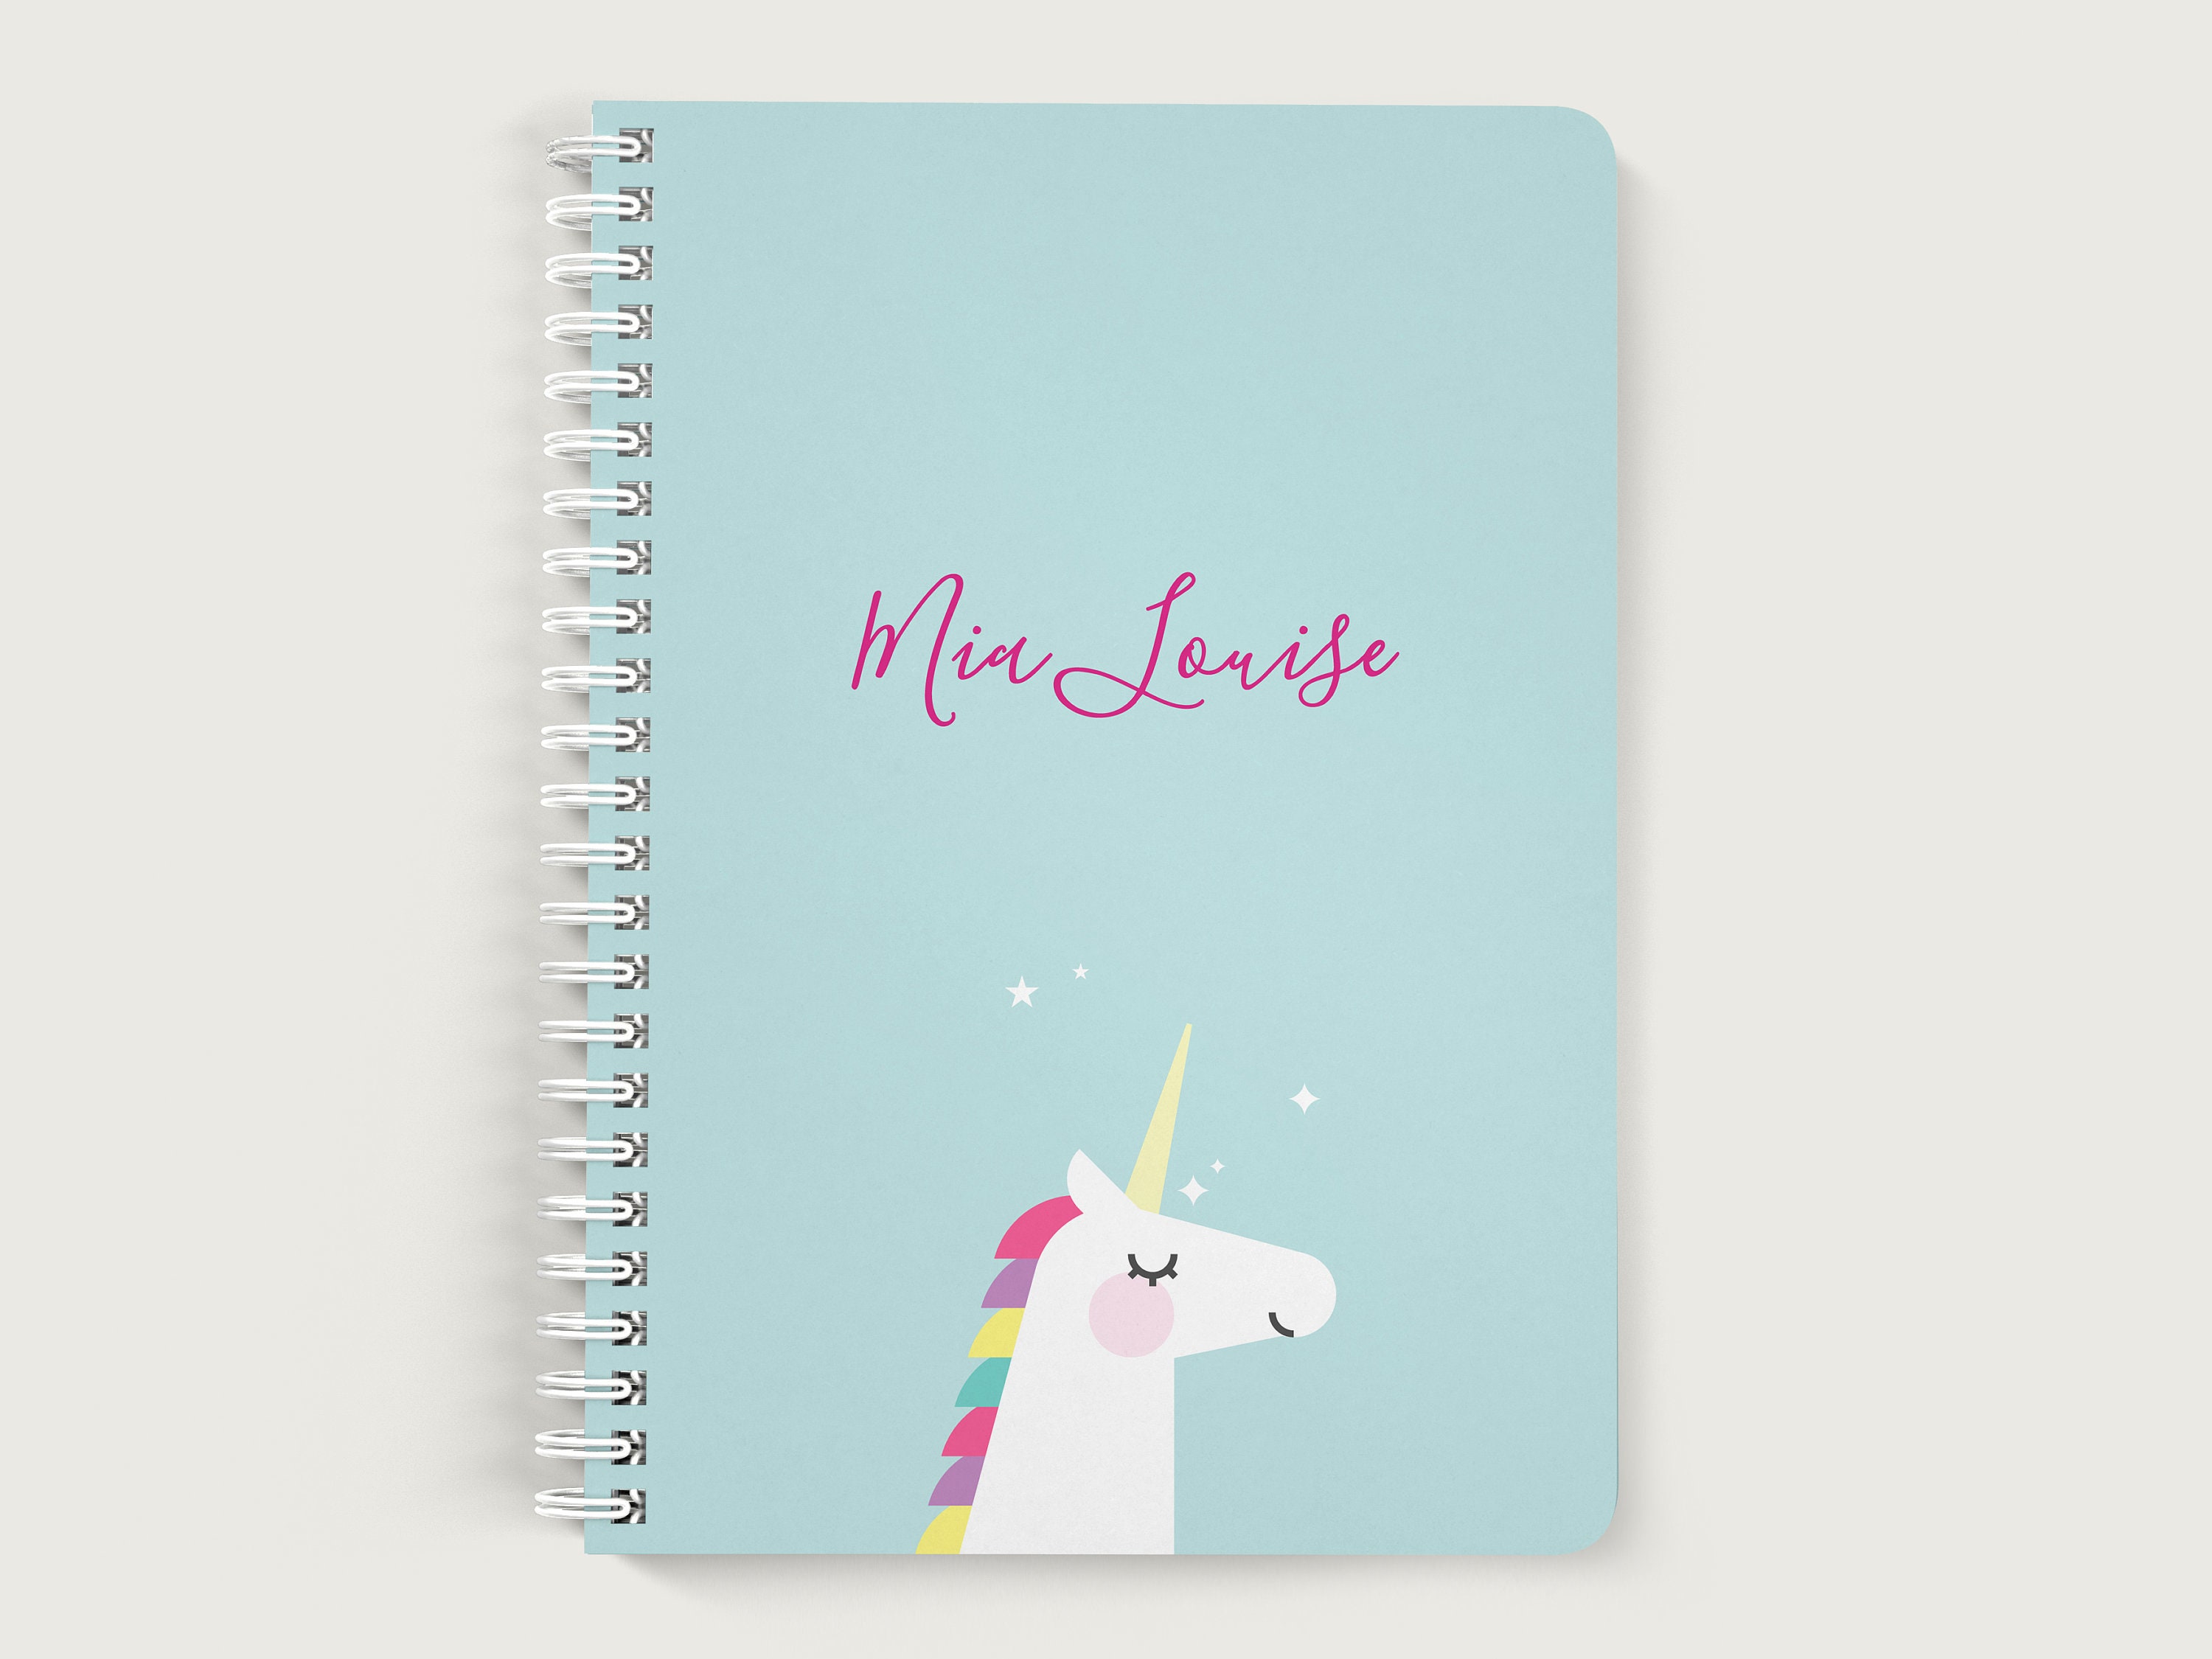 Personalized Notebook, Unicorn Sketchbook, Coil Bound, Write Stories,  Drawing Journal, Book for Kids or Teens, Customize With Name 